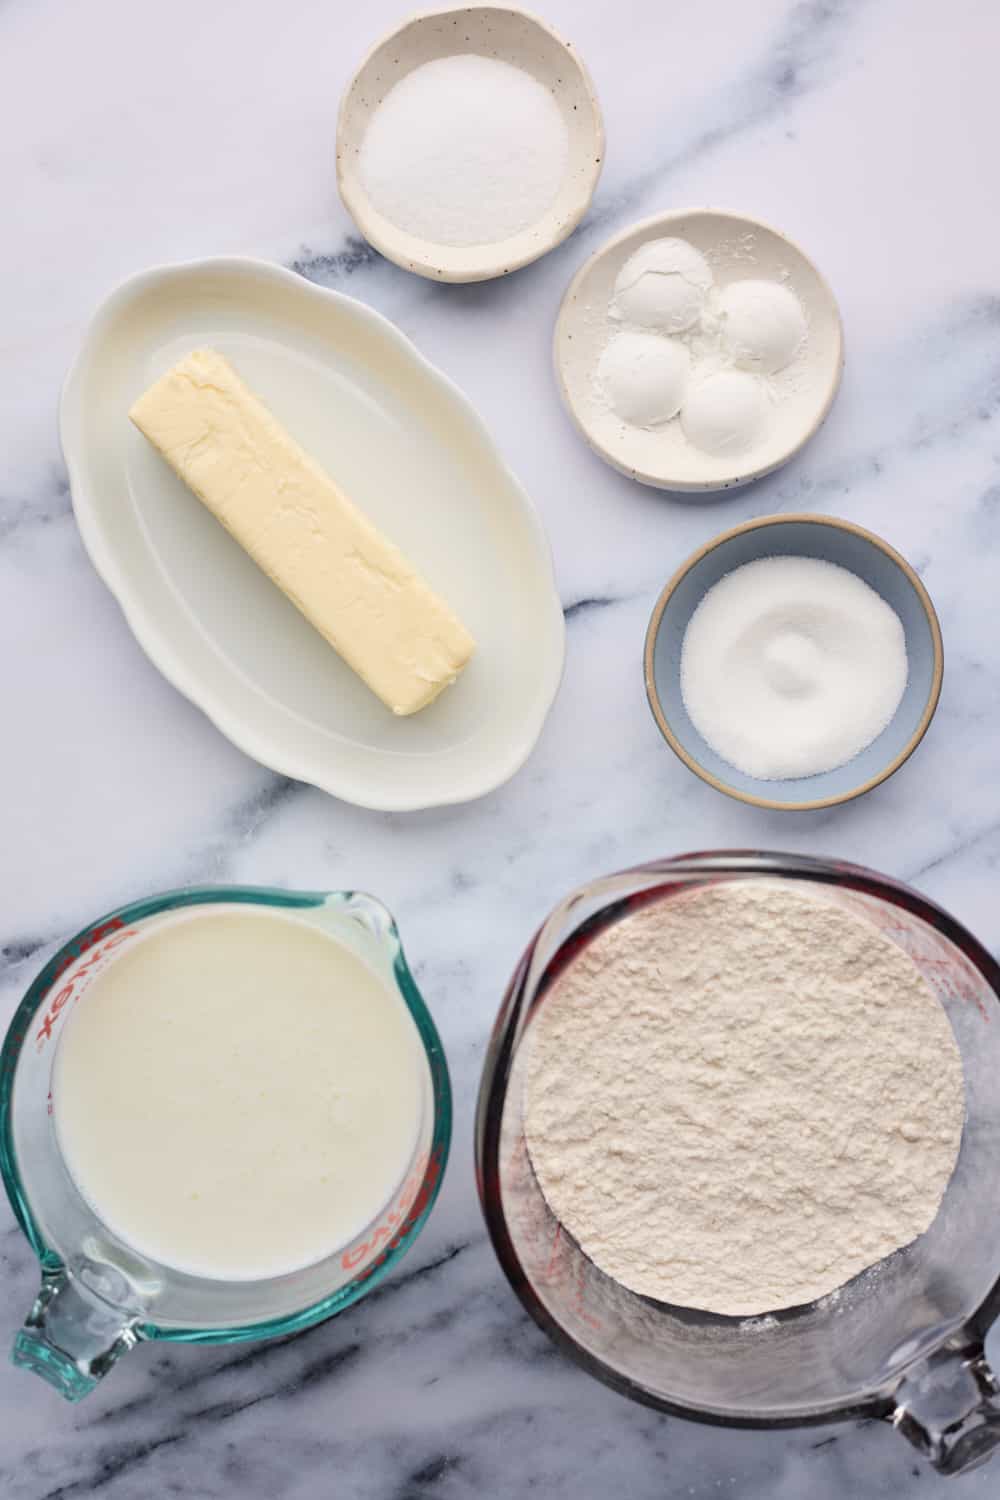 Ingredients in dishes to make biscuits